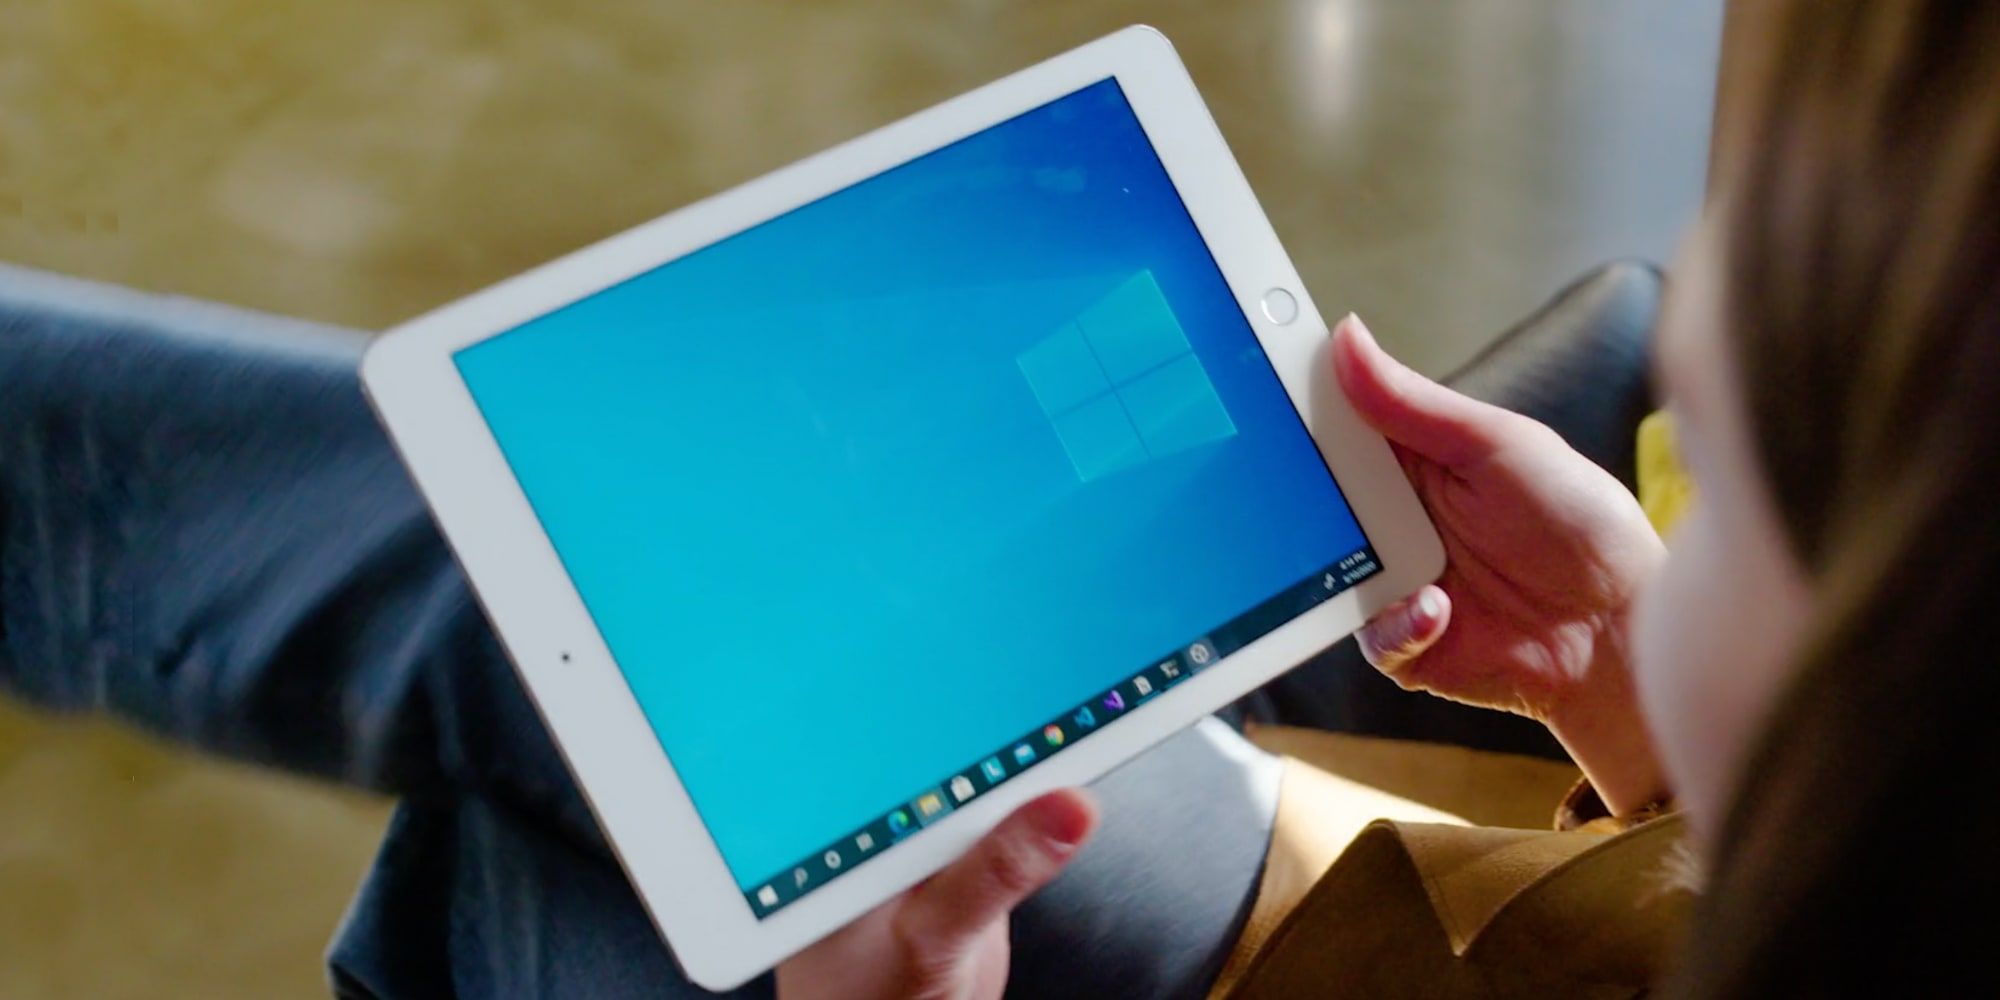 Luna Display Turns An iPad Into A Wireless Monitor For Your Windows PC